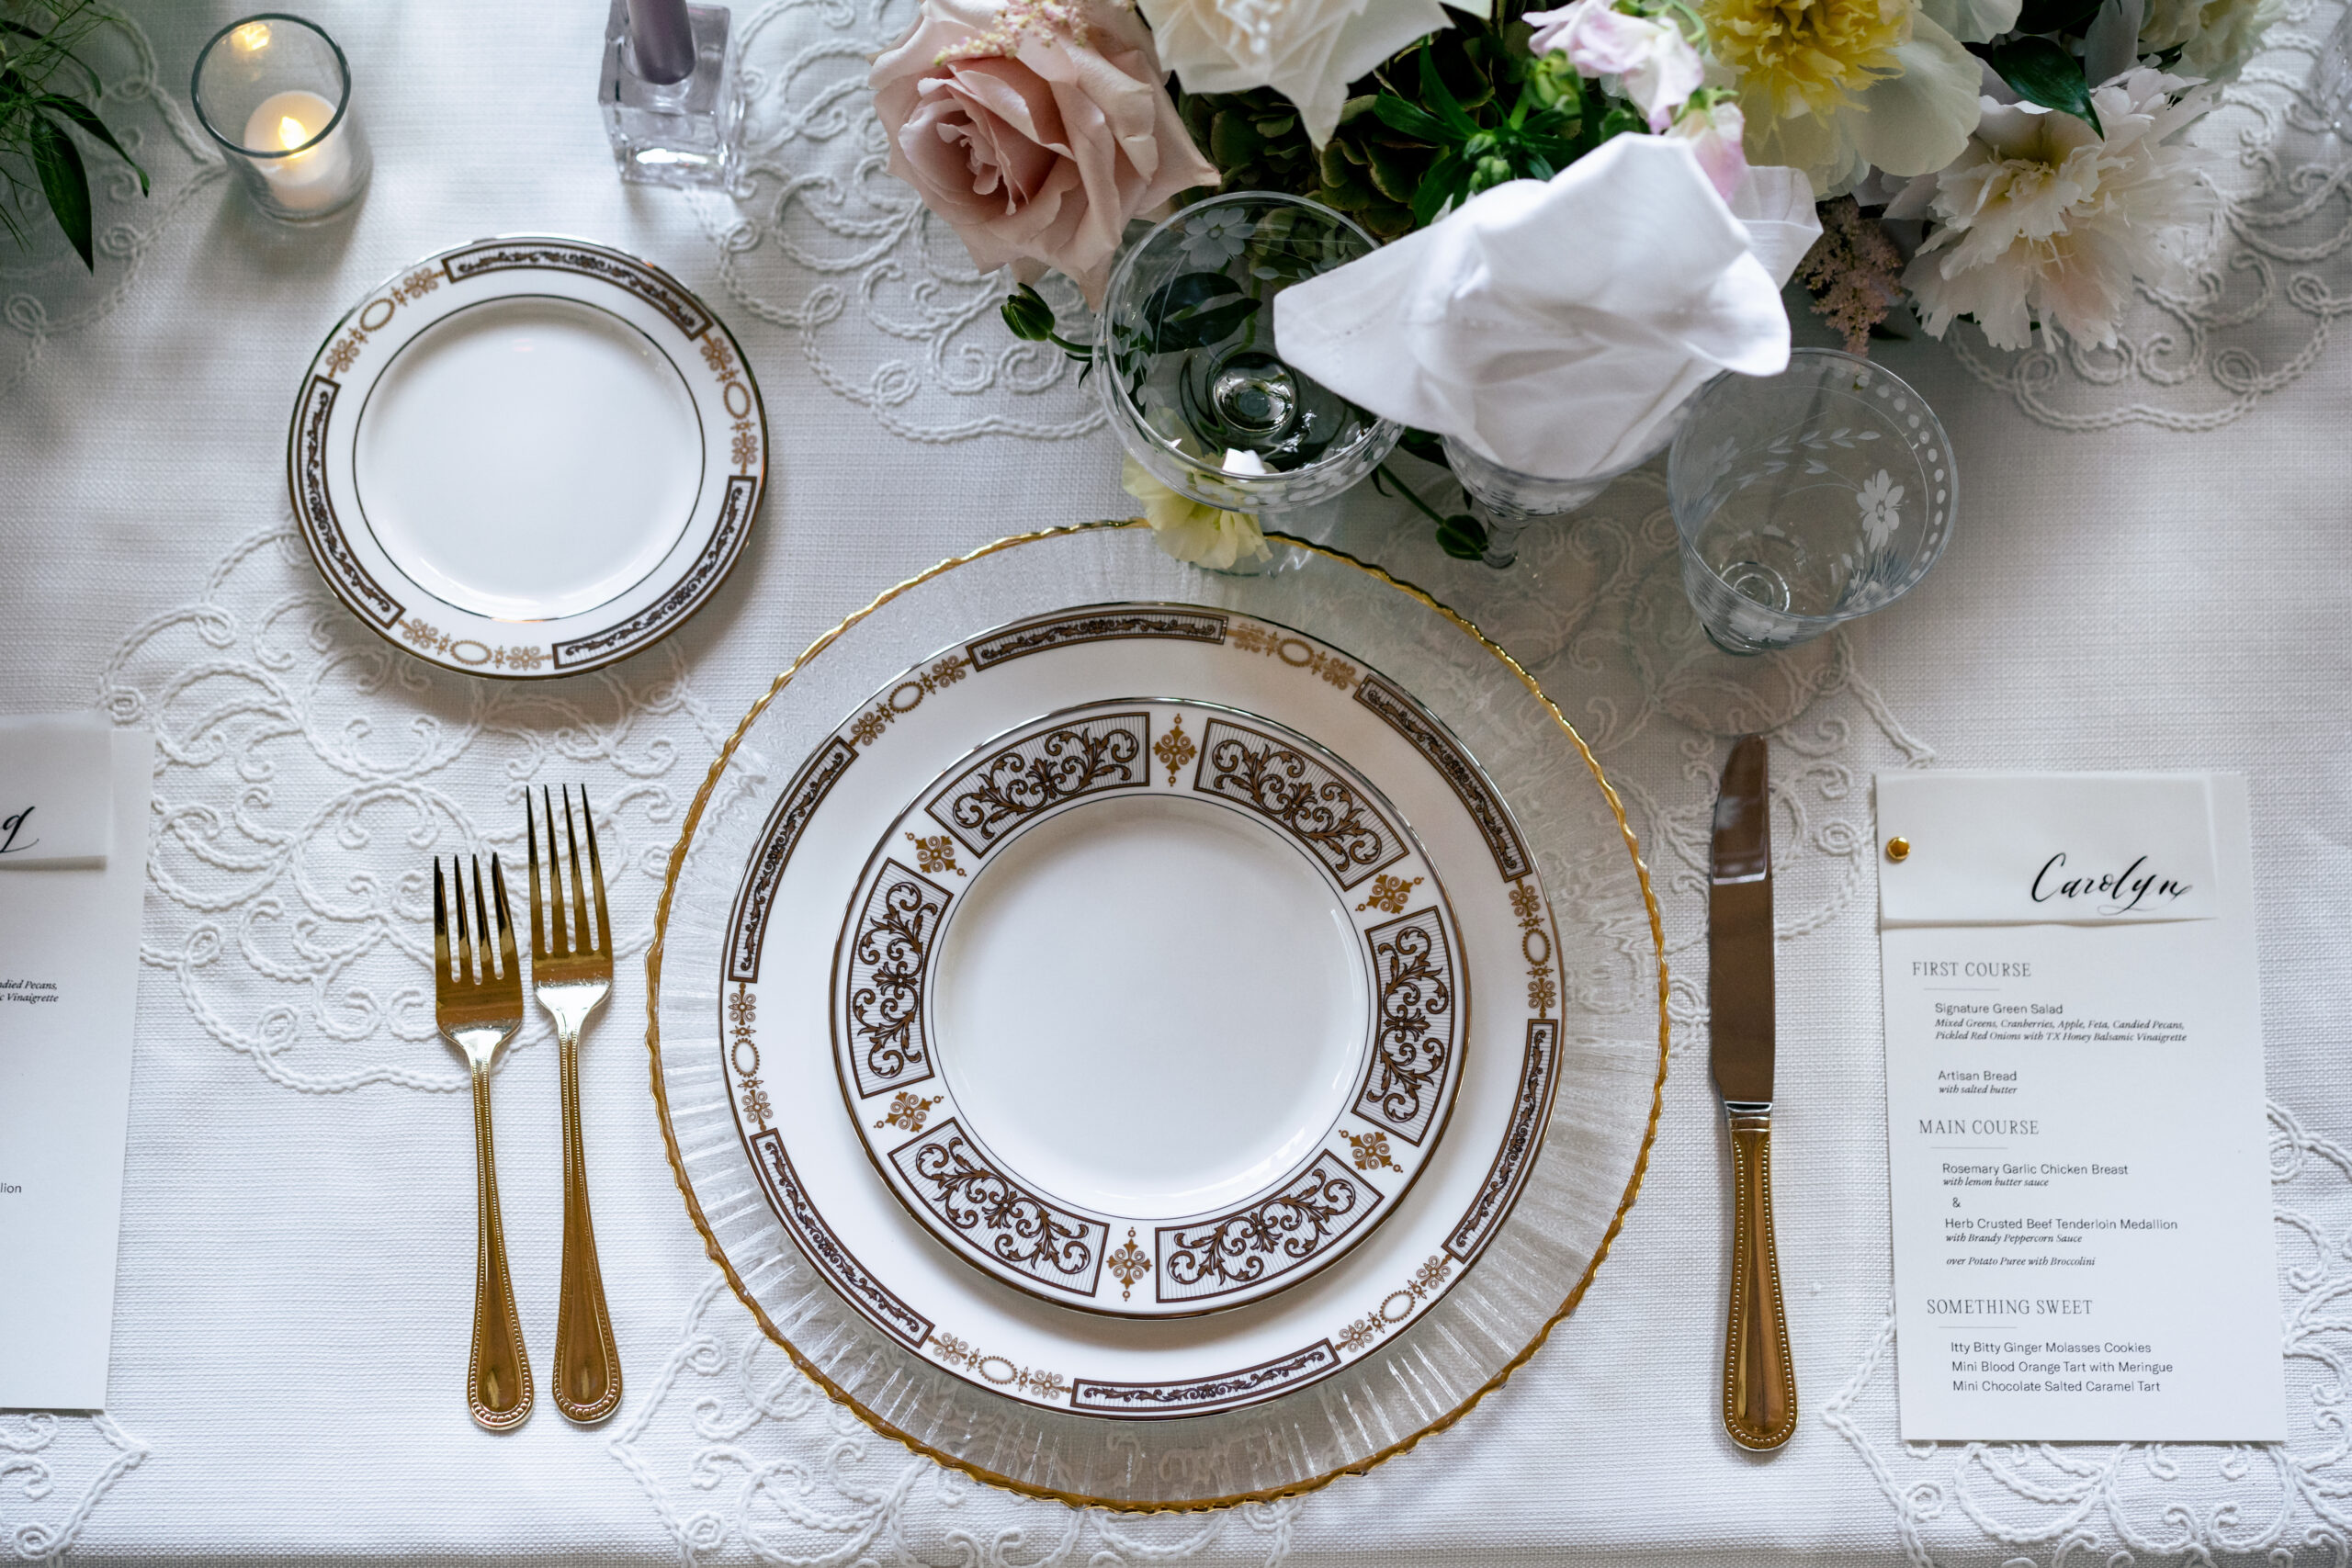 This image features an elegantly set dining table with a sophisticated place setting. The table is covered with a finely embroidered white tablecloth. The centerpiece of the setting is a decorative china plate with intricate gold and black patterns, accompanied by a smaller side plate with matching designs. Gold-plated cutlery, including two forks and a knife, is arranged neatly alongside the plates. A crystal glass with an etched floral design holds a white napkin, and fresh flowers in soft pastel colors add a touch of elegance. A menu card with the name "Carolyn" details the courses for the meal, including a first course, main course, and desserts. A lit candle in a small glass holder enhances the intimate and refined ambiance of the table setting.